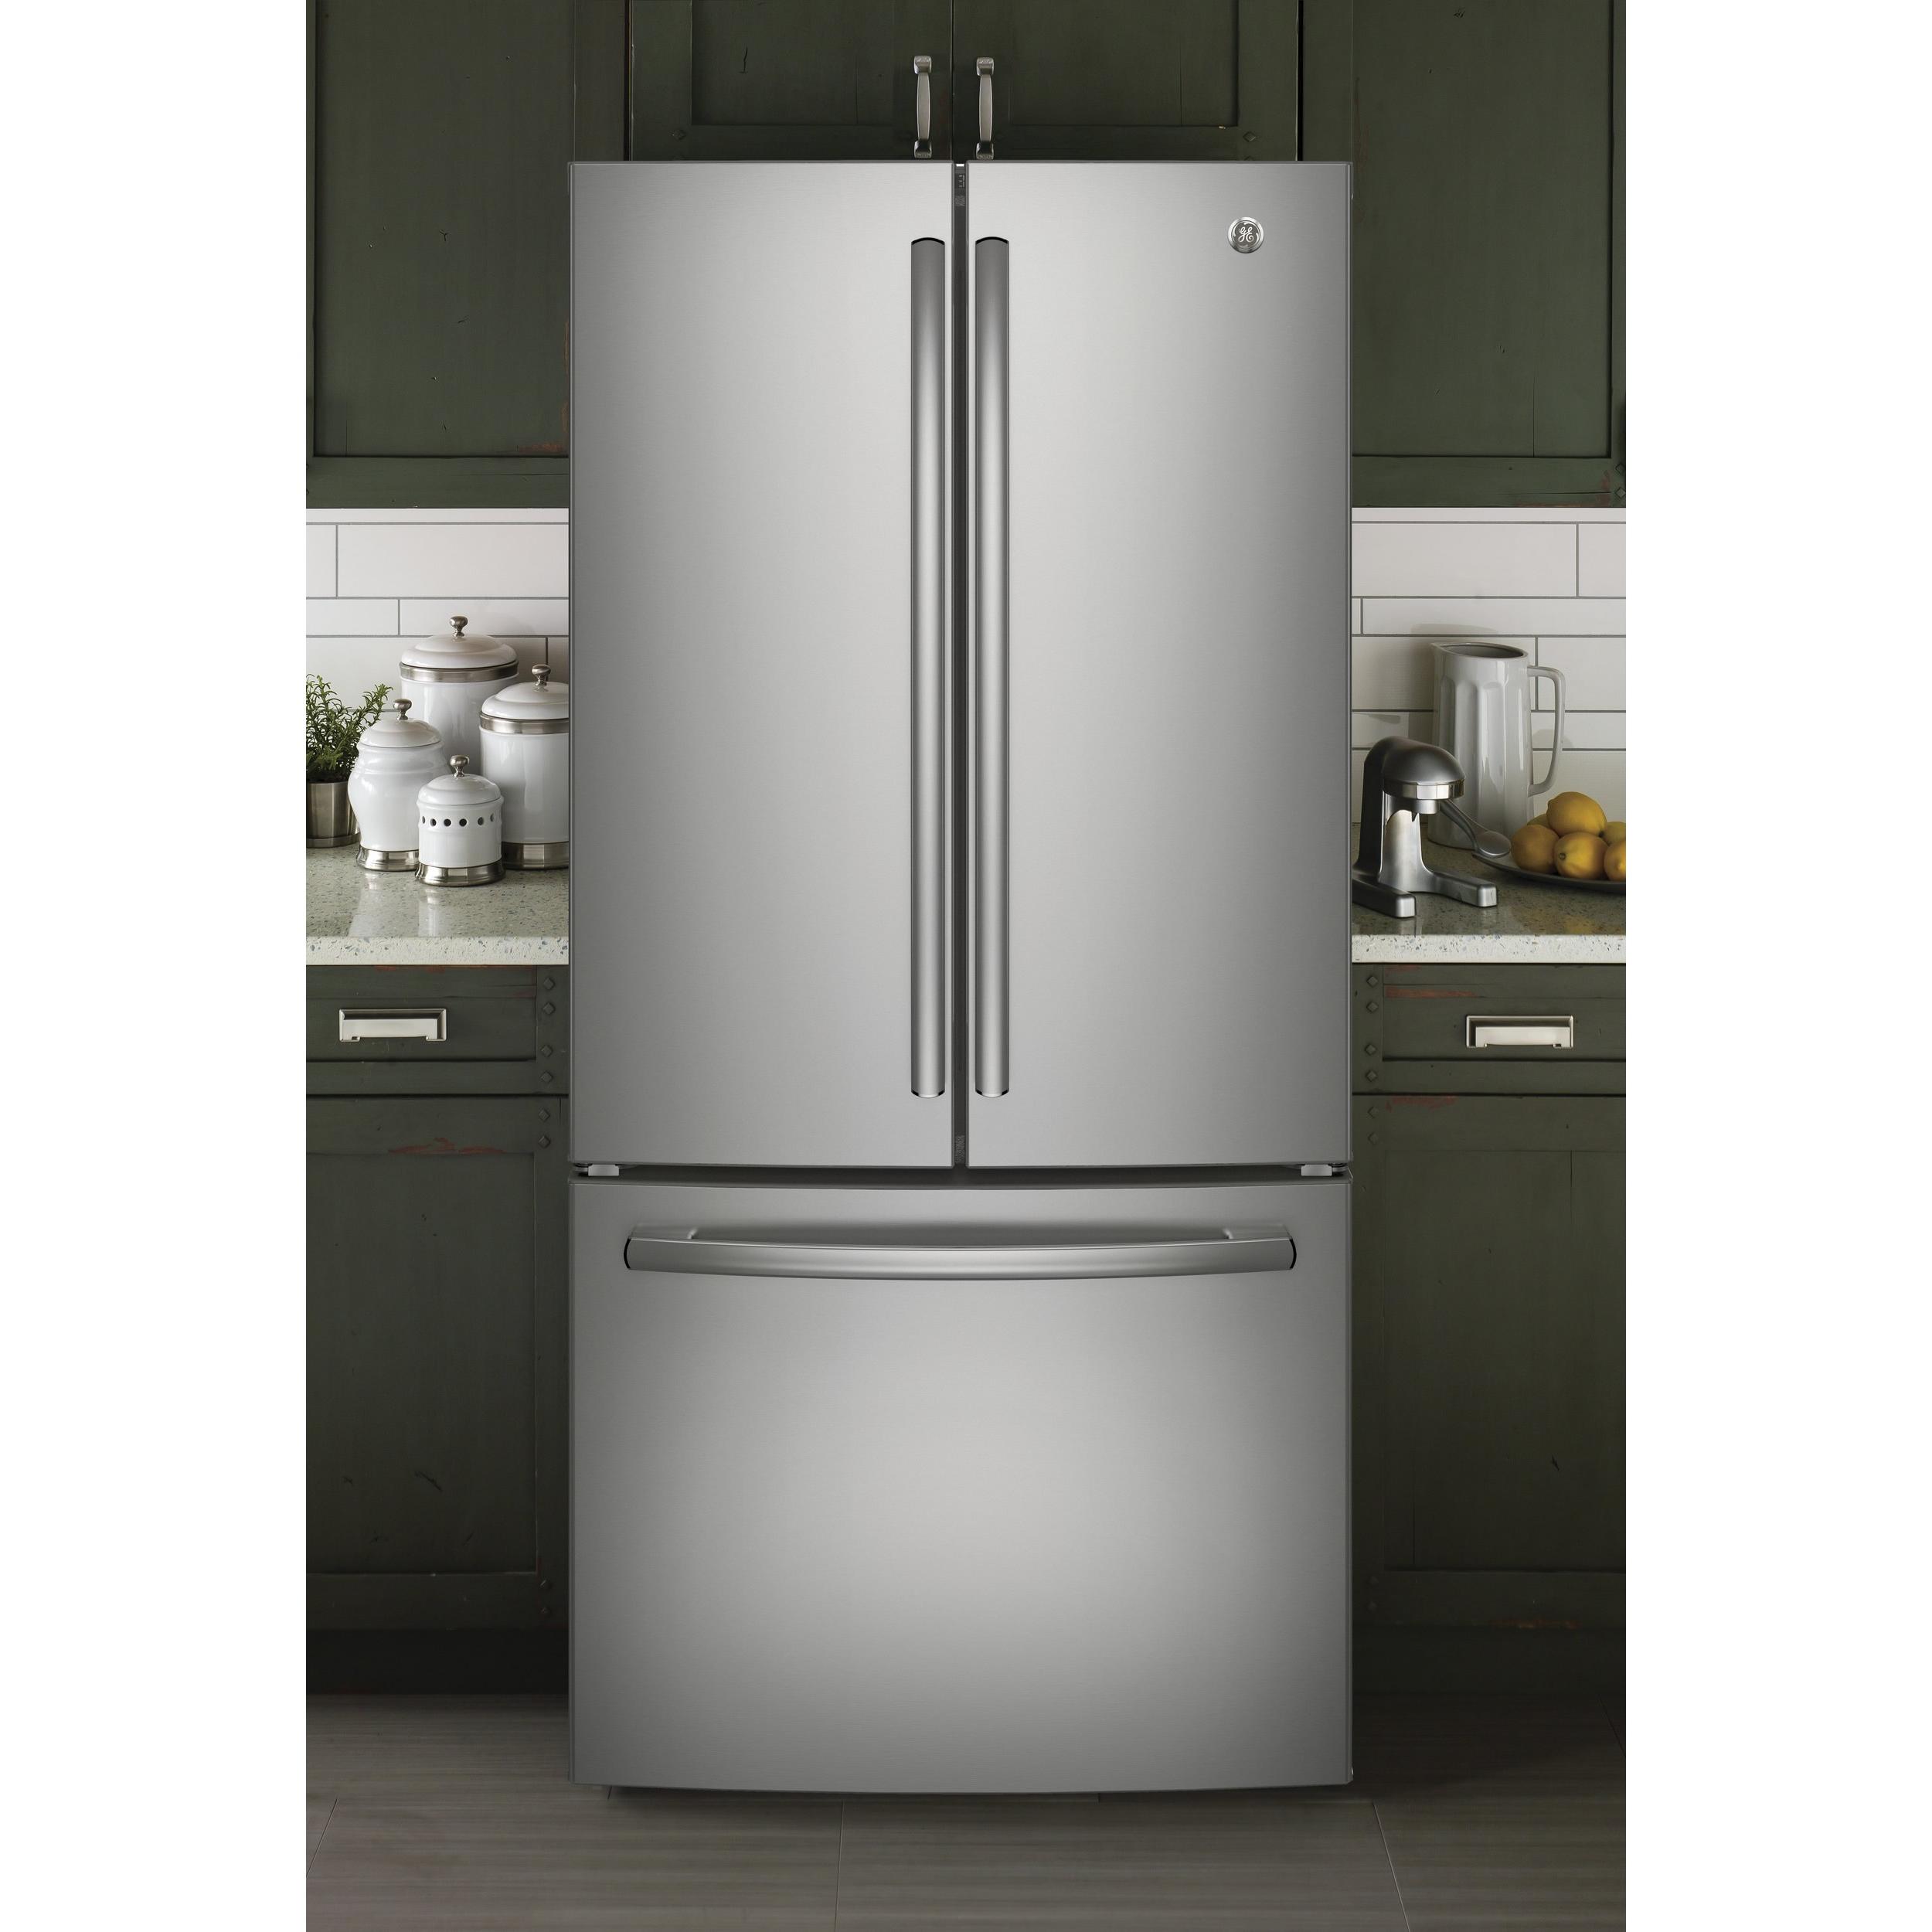 GE 33-inch, 24.8 cu. ft. French 3-Door Refrigerator with Ice and Water GNE25JSKSS